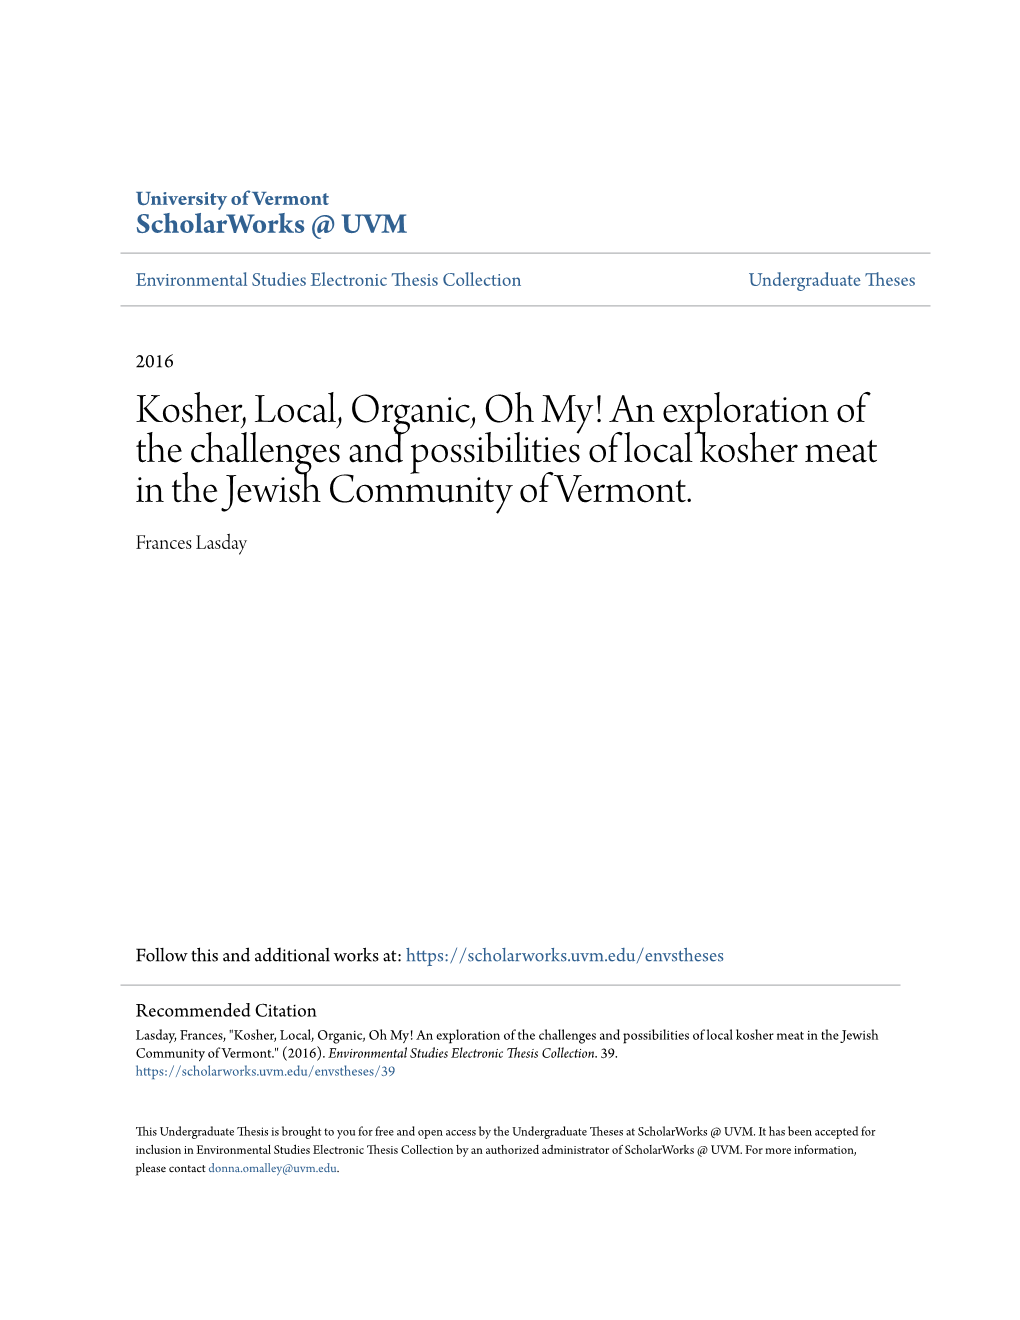 Kosher, Local, Organic, Oh My! an Exploration of the Challenges and Possibilities of Local Kosher Meat in the Jewish Community of Vermont